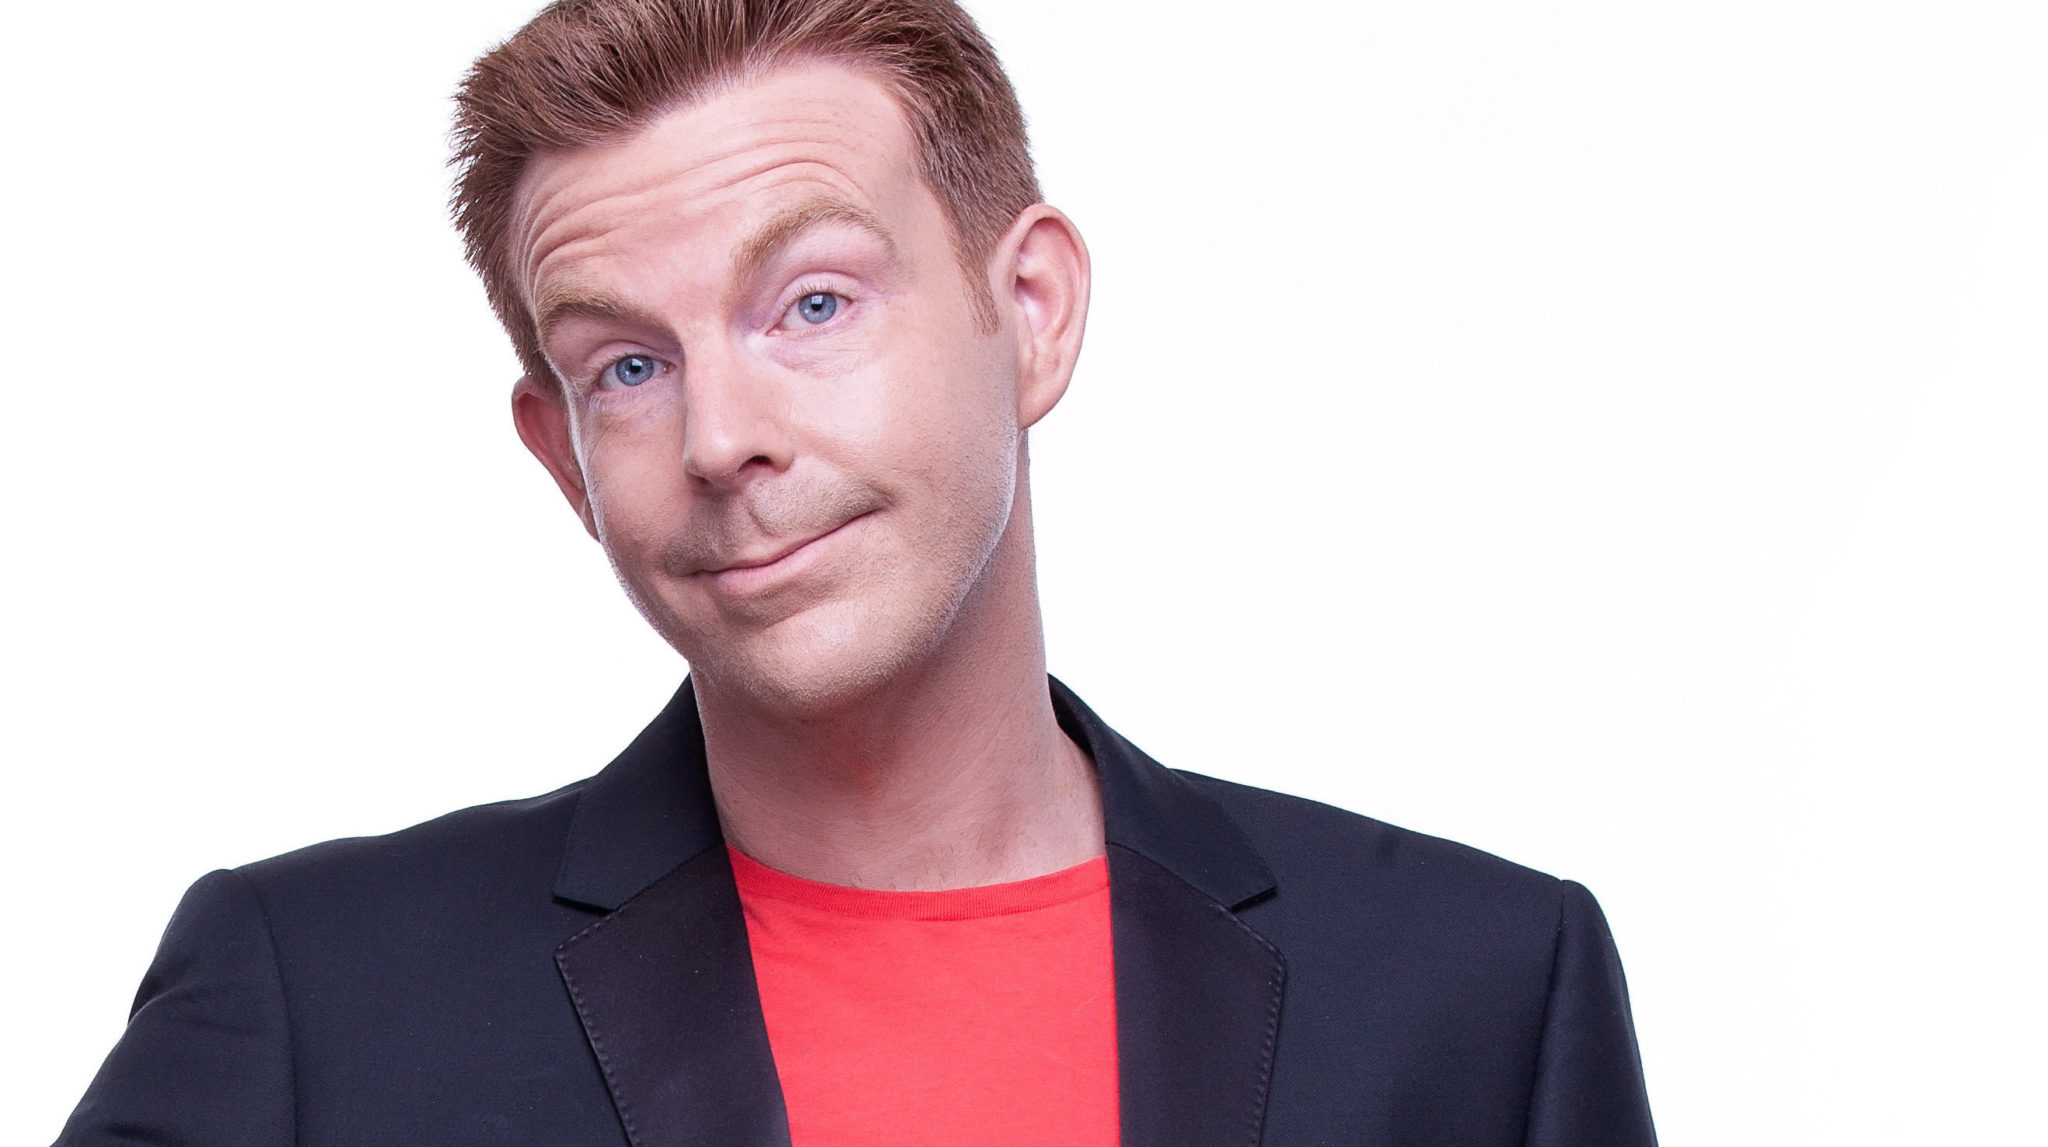 Alex Belfield is a Broadcaster, Musician, Comedian and Entertainer from Nottingham. Email – alex@alexbelfield.co.uk From Warm Up @ ITV, Newspaper Exclusives to sell-out tours – […]